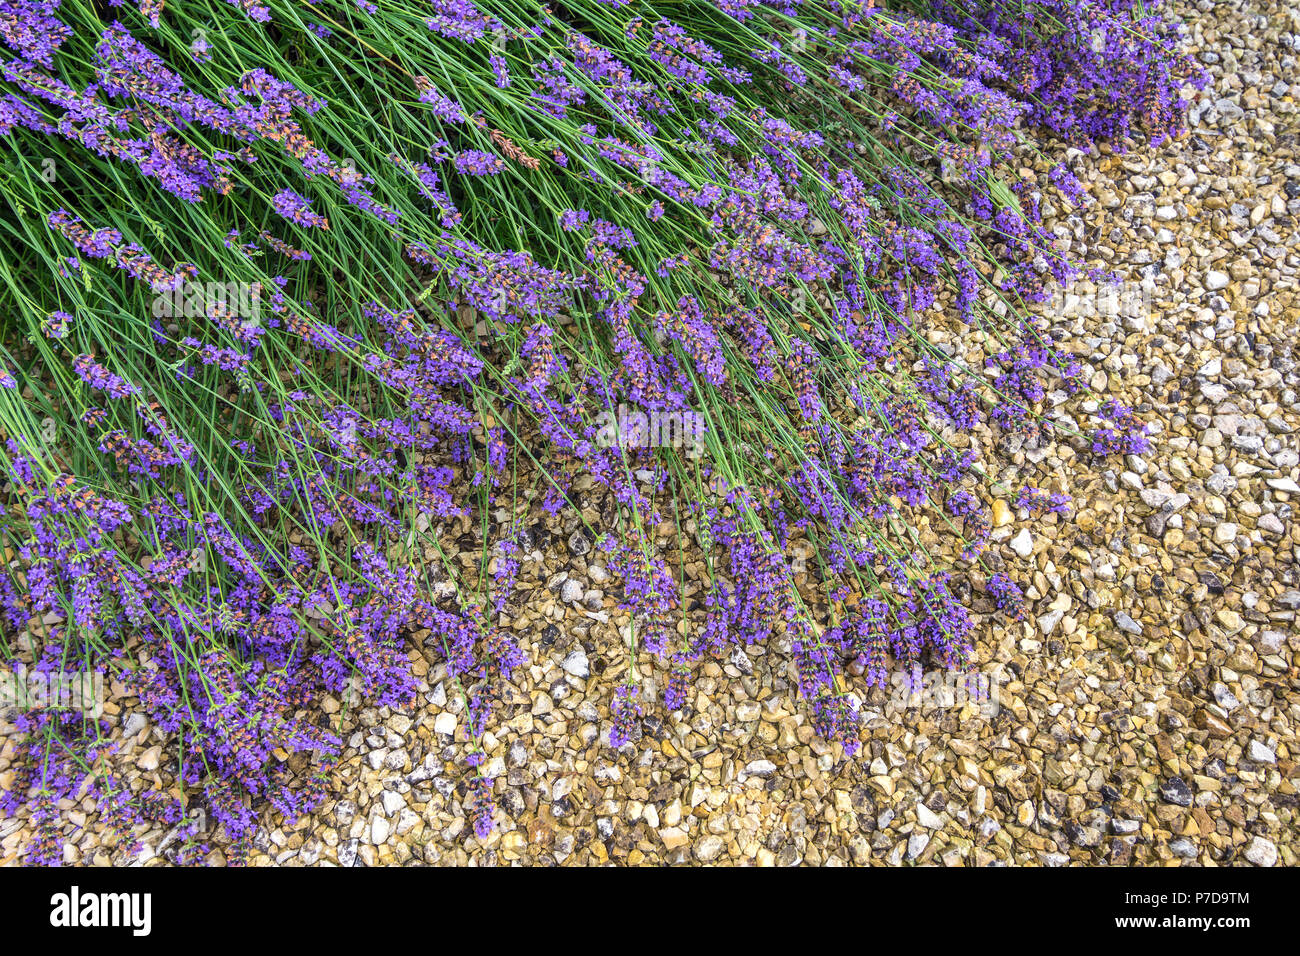 Flowering Lavender against ground after heavy rain. Stock Photo